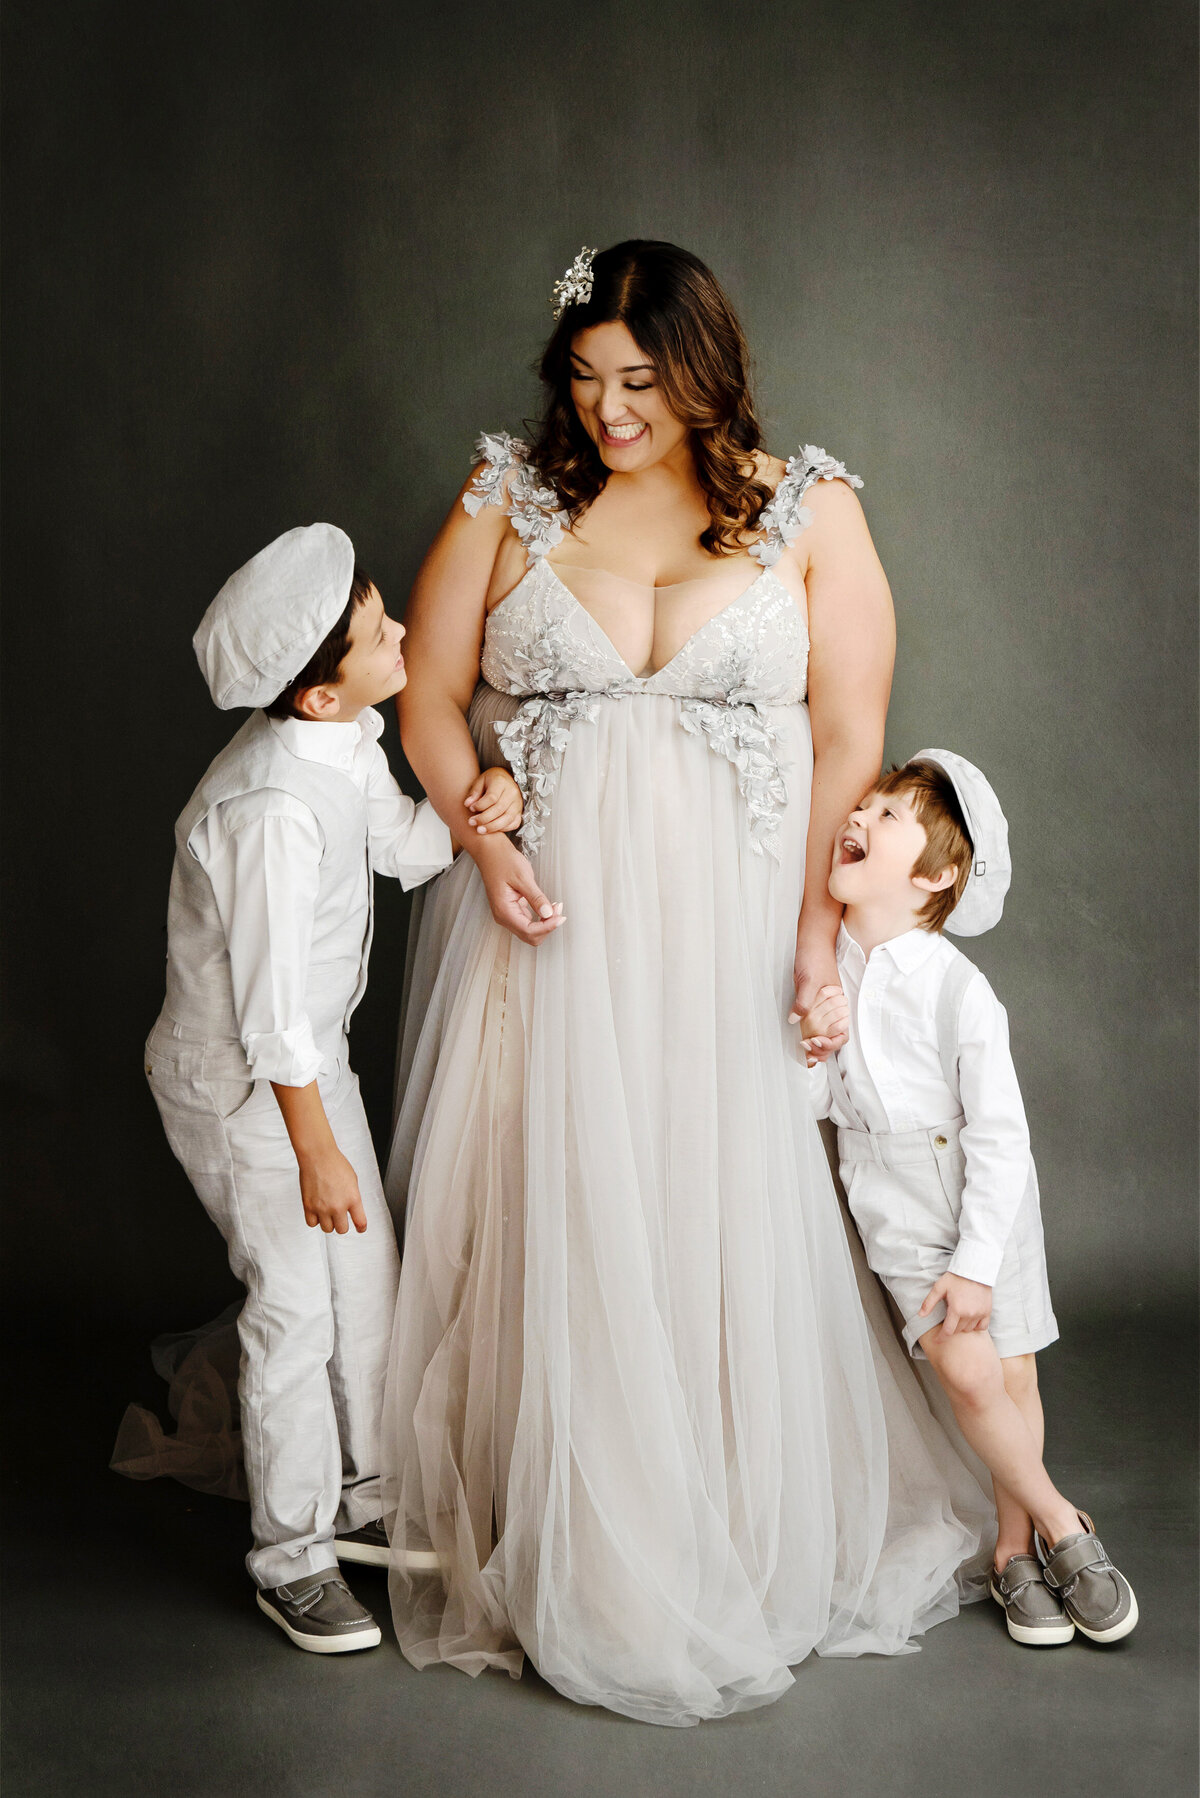 st-louis-motherhood-photographer-mother-in-silver-tulle-gown-with-floral-details-holding-sons-hands-on-either-side-wearing-white-newsboy-outfits-similing